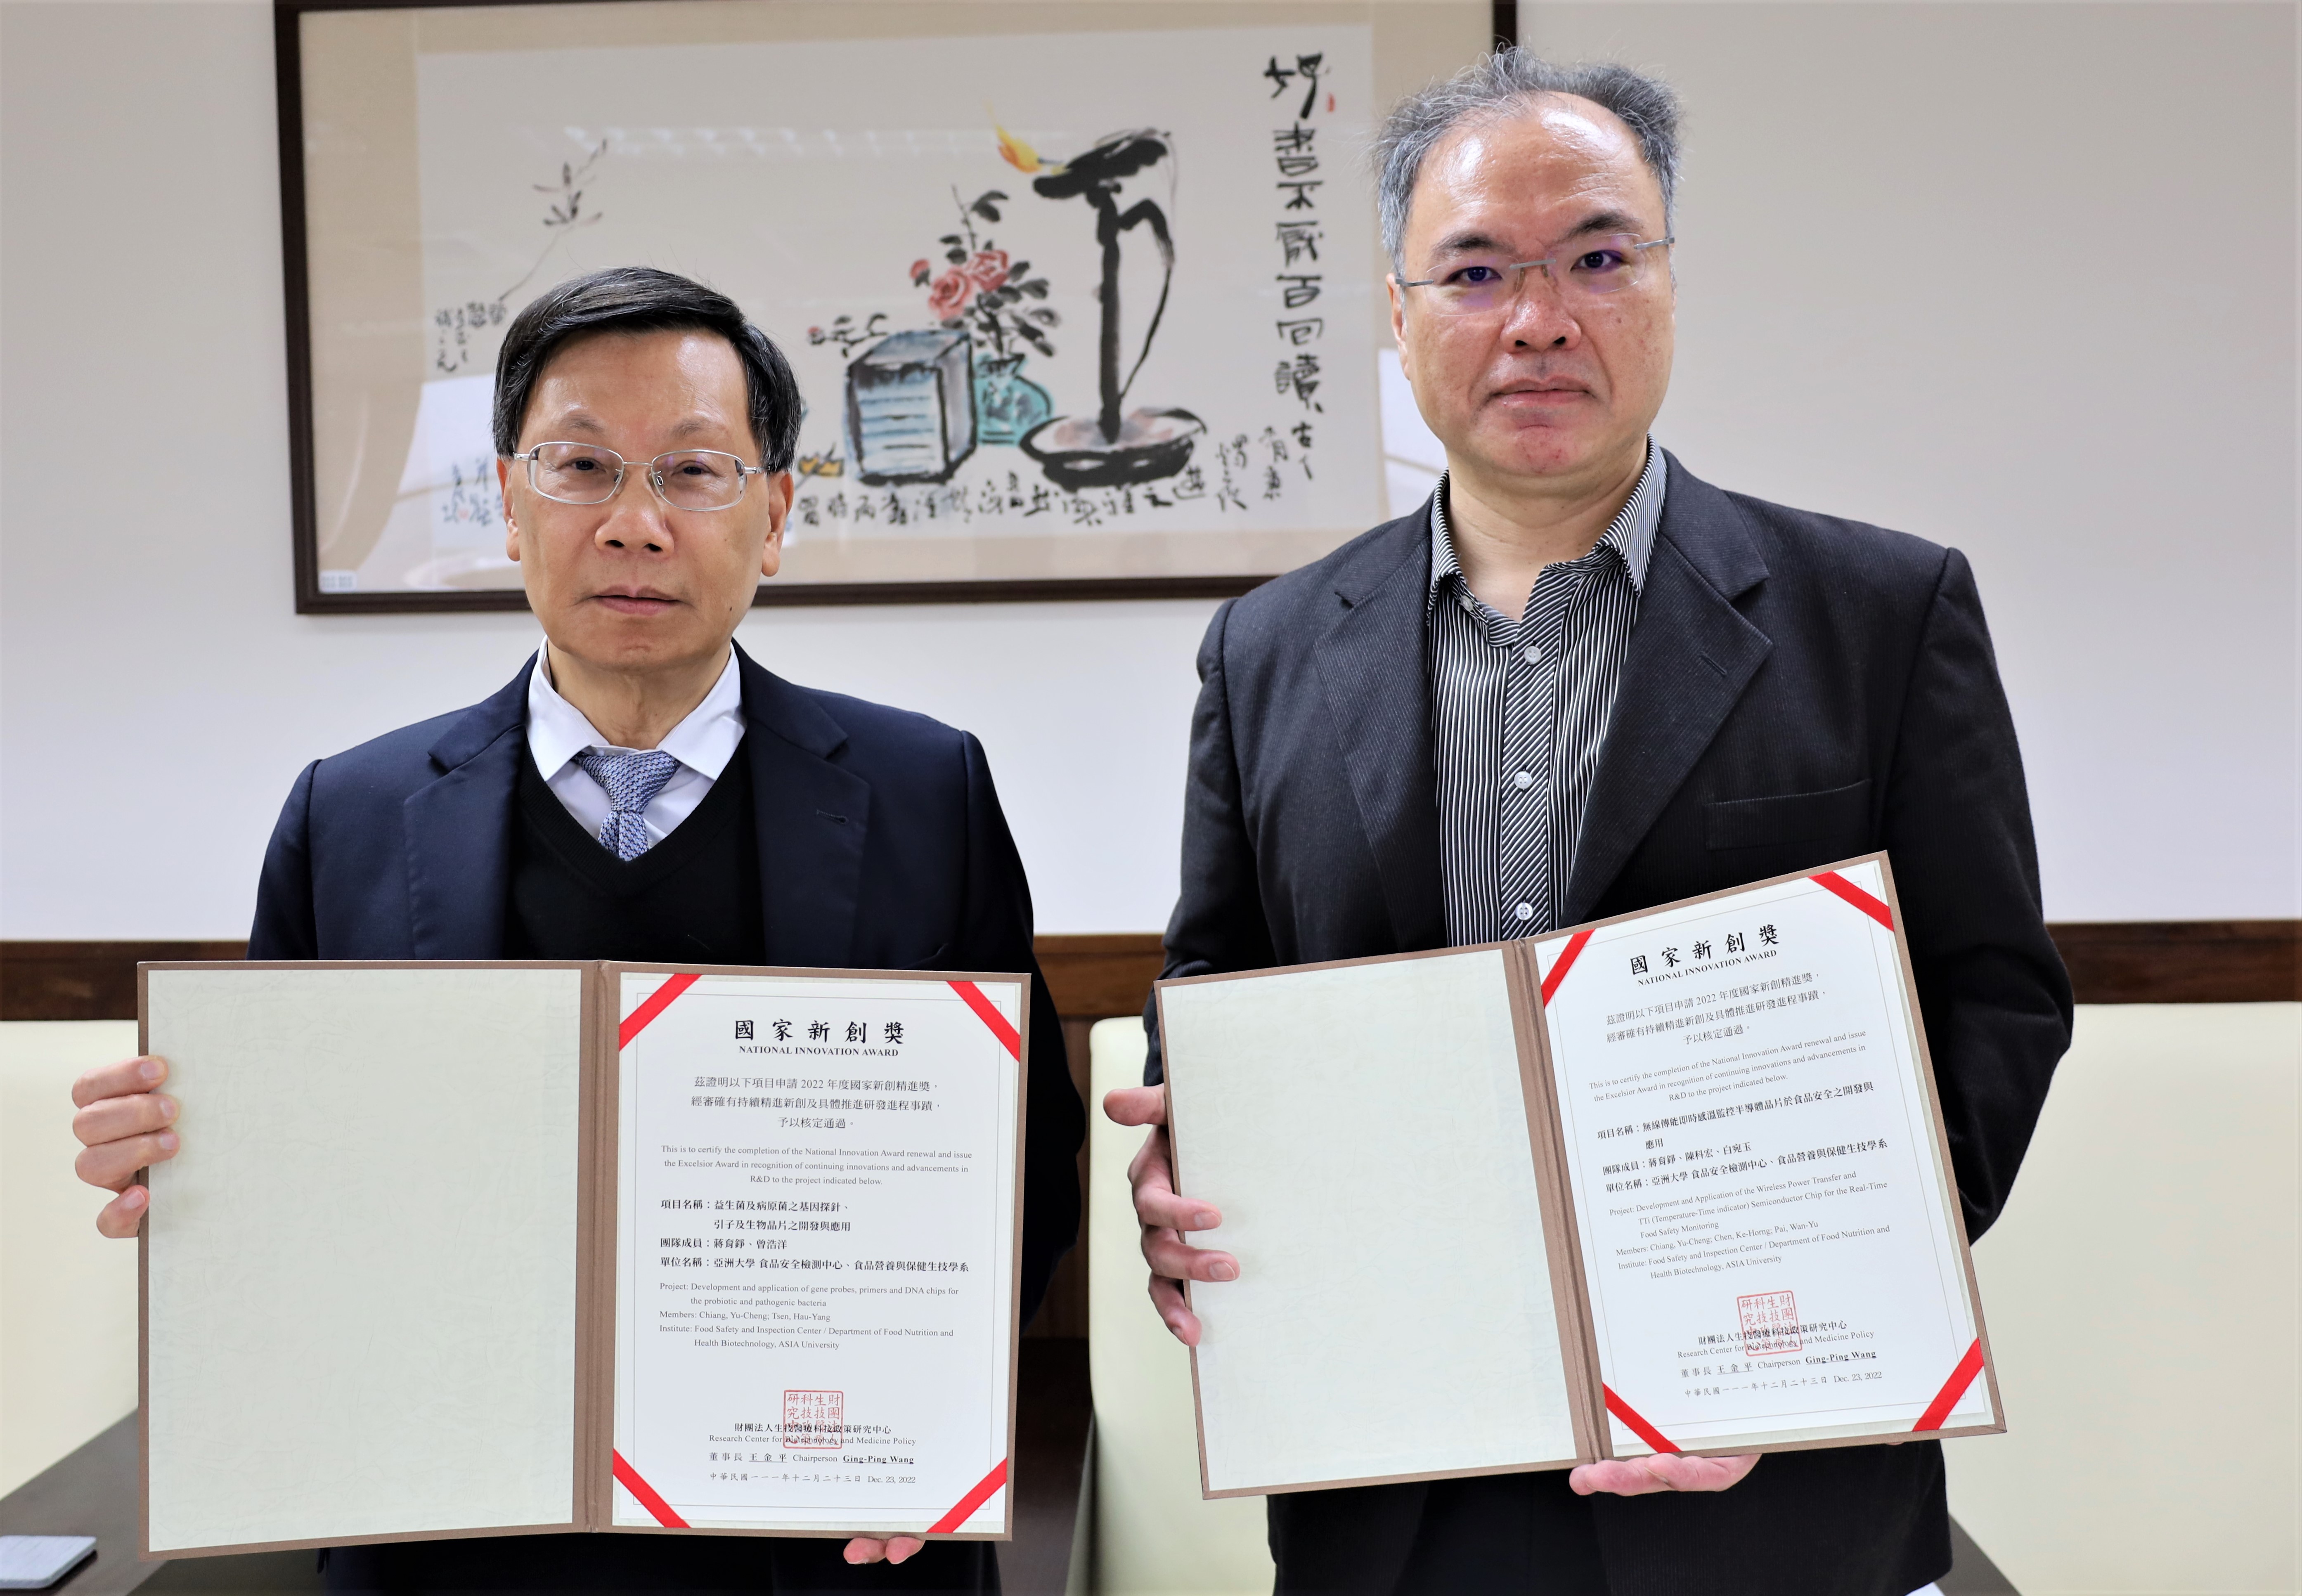 Over the course of 5 years, Asia University has garnered a total of 16 "National Innovation Awards" and "Excelsior Award." The photo features Asia University President Jeffrey J.P. Tsai (left) alongside Yu-Cheng Chiang, Director of Asia University's Food Safety and Inspection Center